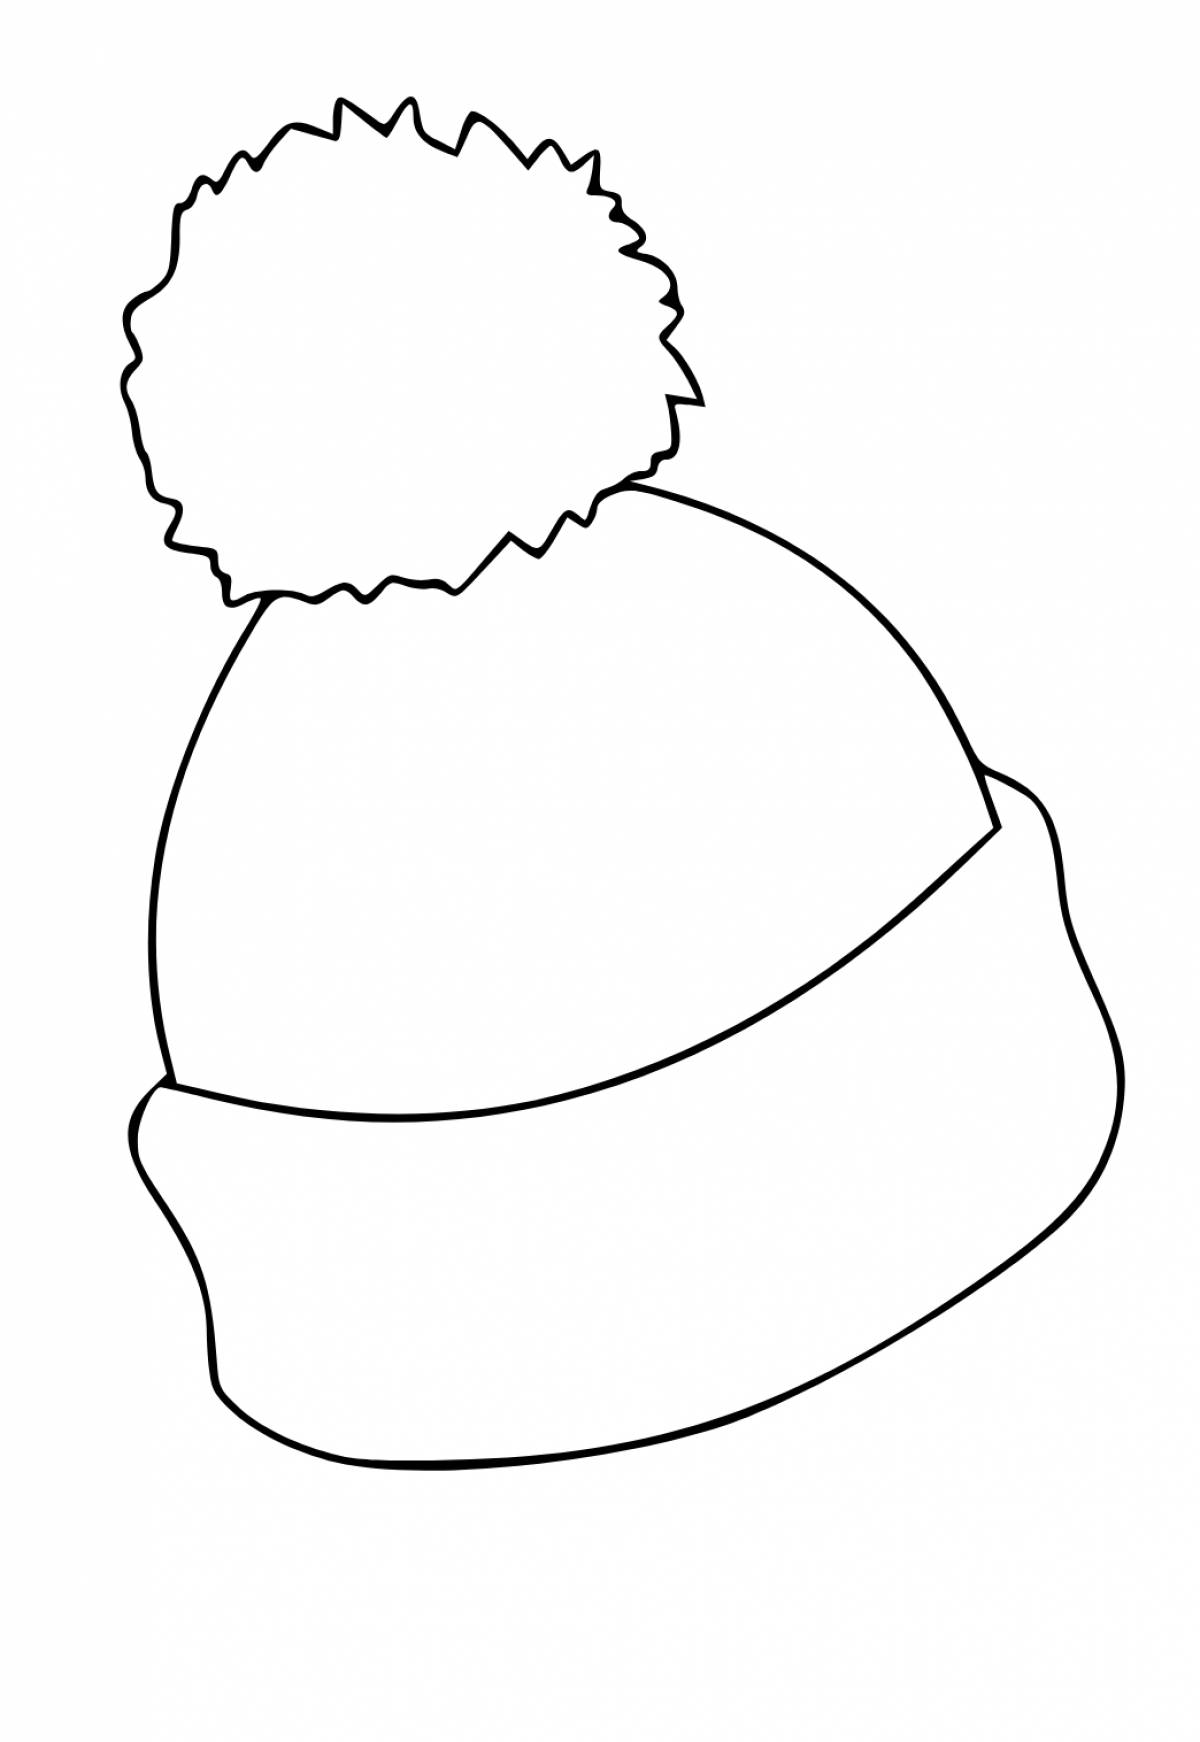 Coloring page glamor hat for children 4-5 years old